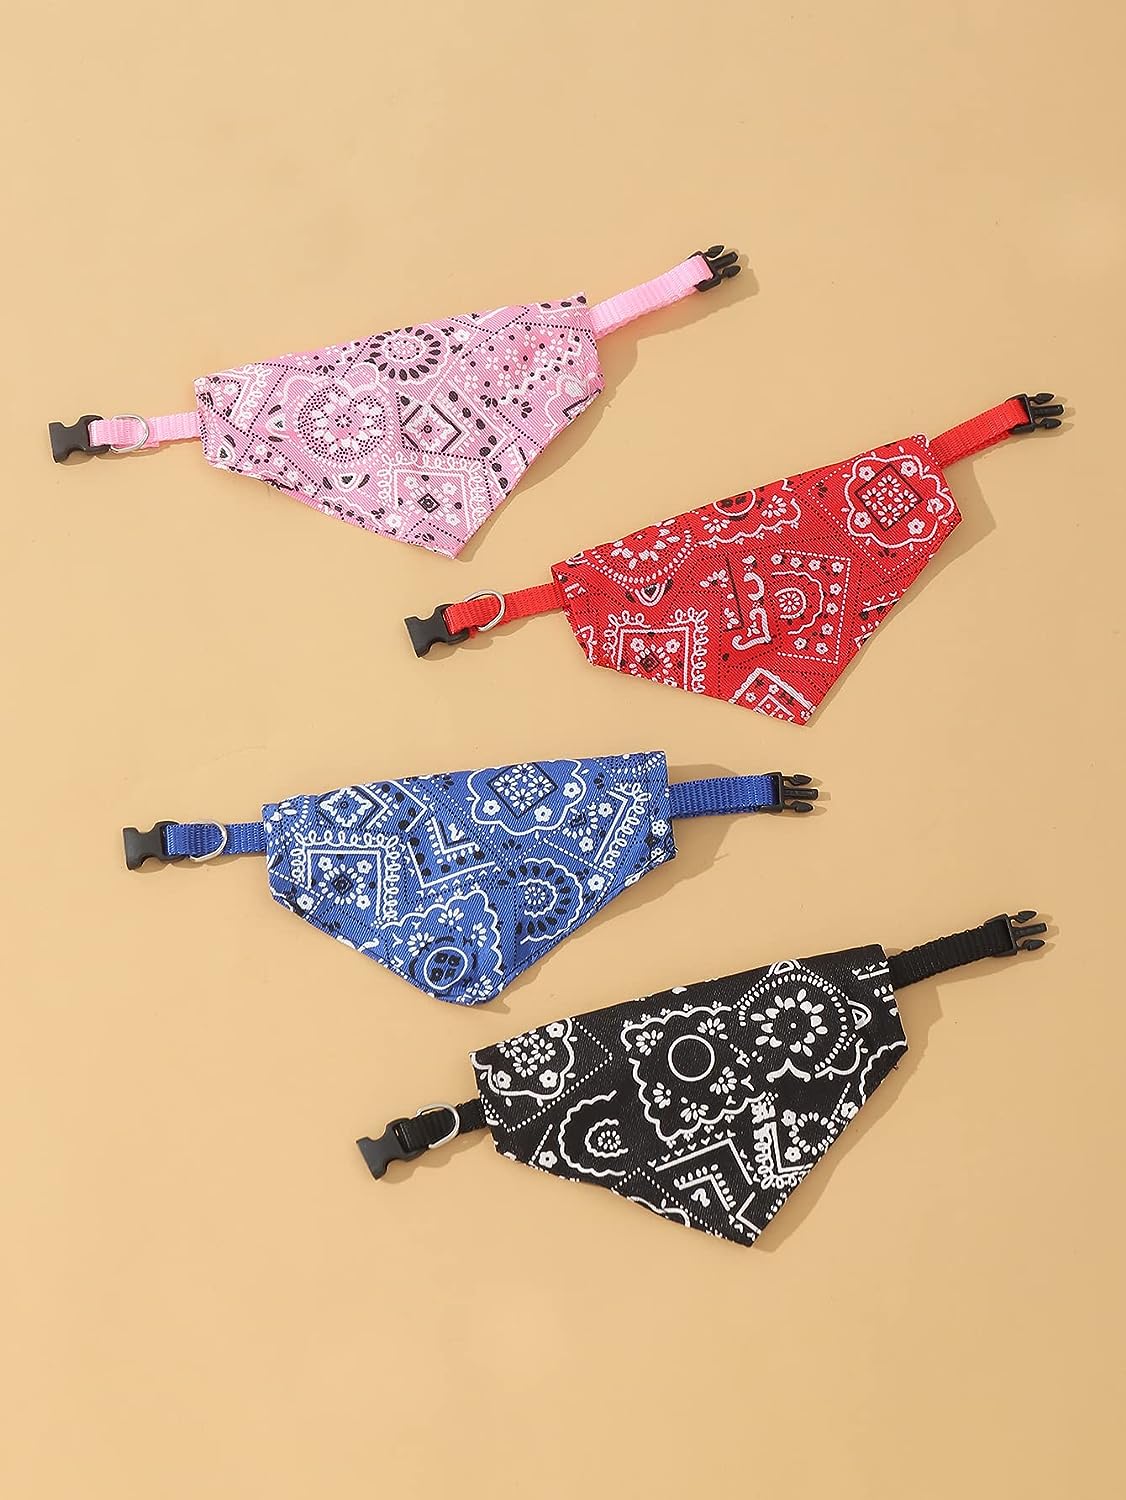 Dog / Puppy Bandana Collar Scarf - LOVE these! So easy to clip on and go!